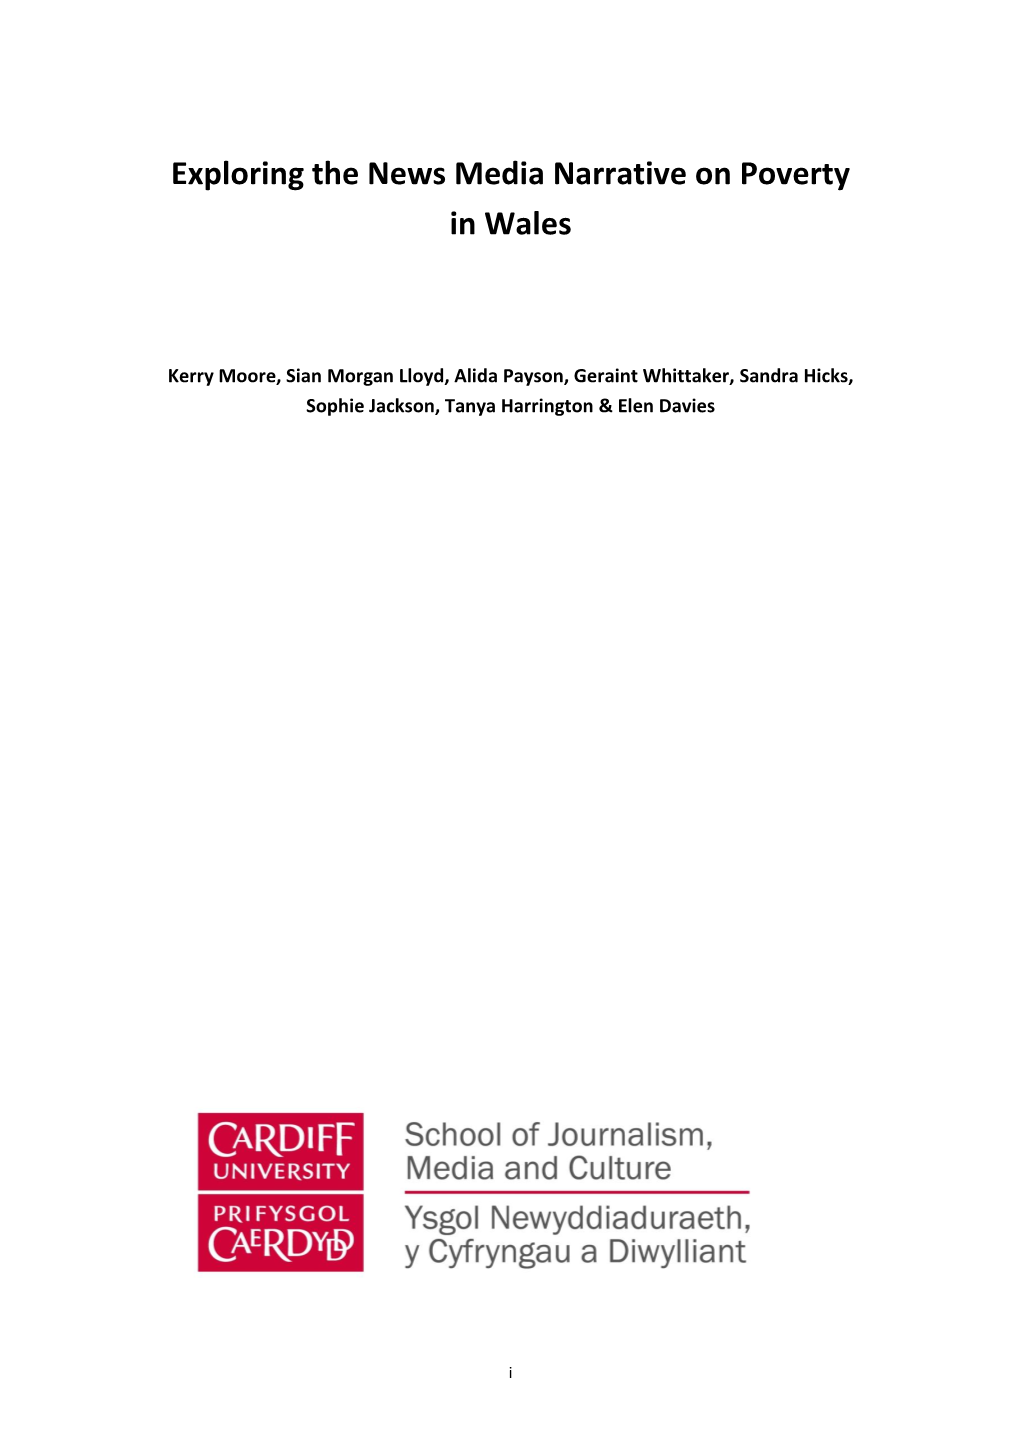 Exploring the News Media Narrative on Poverty in Wales